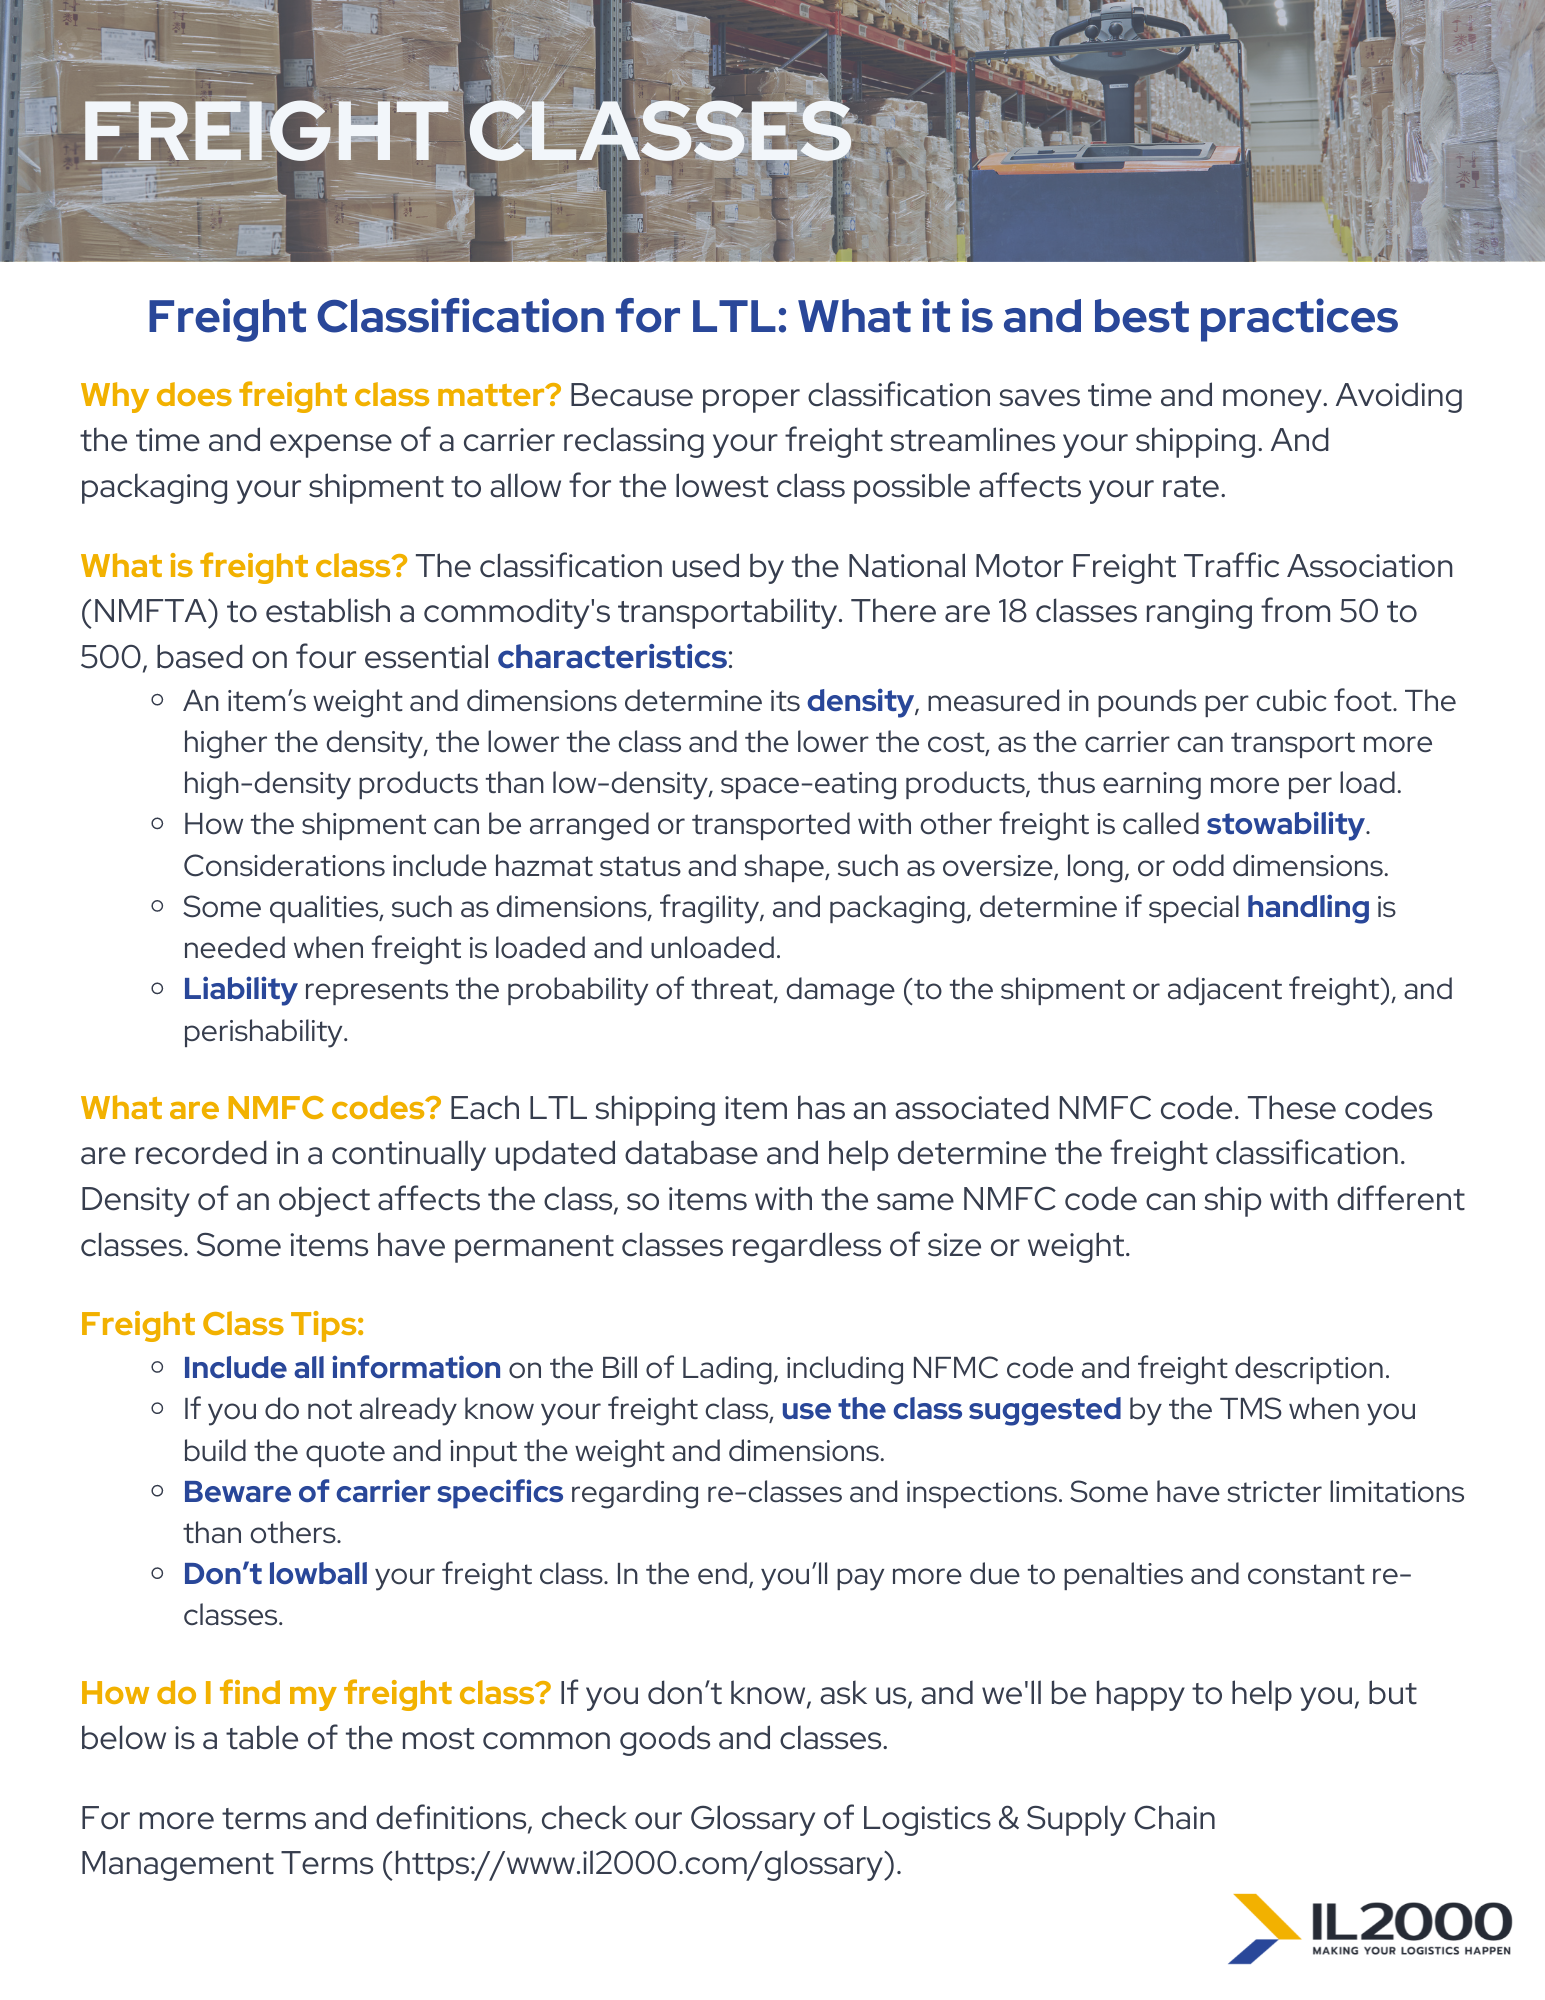 One Sheet_Freight Classes